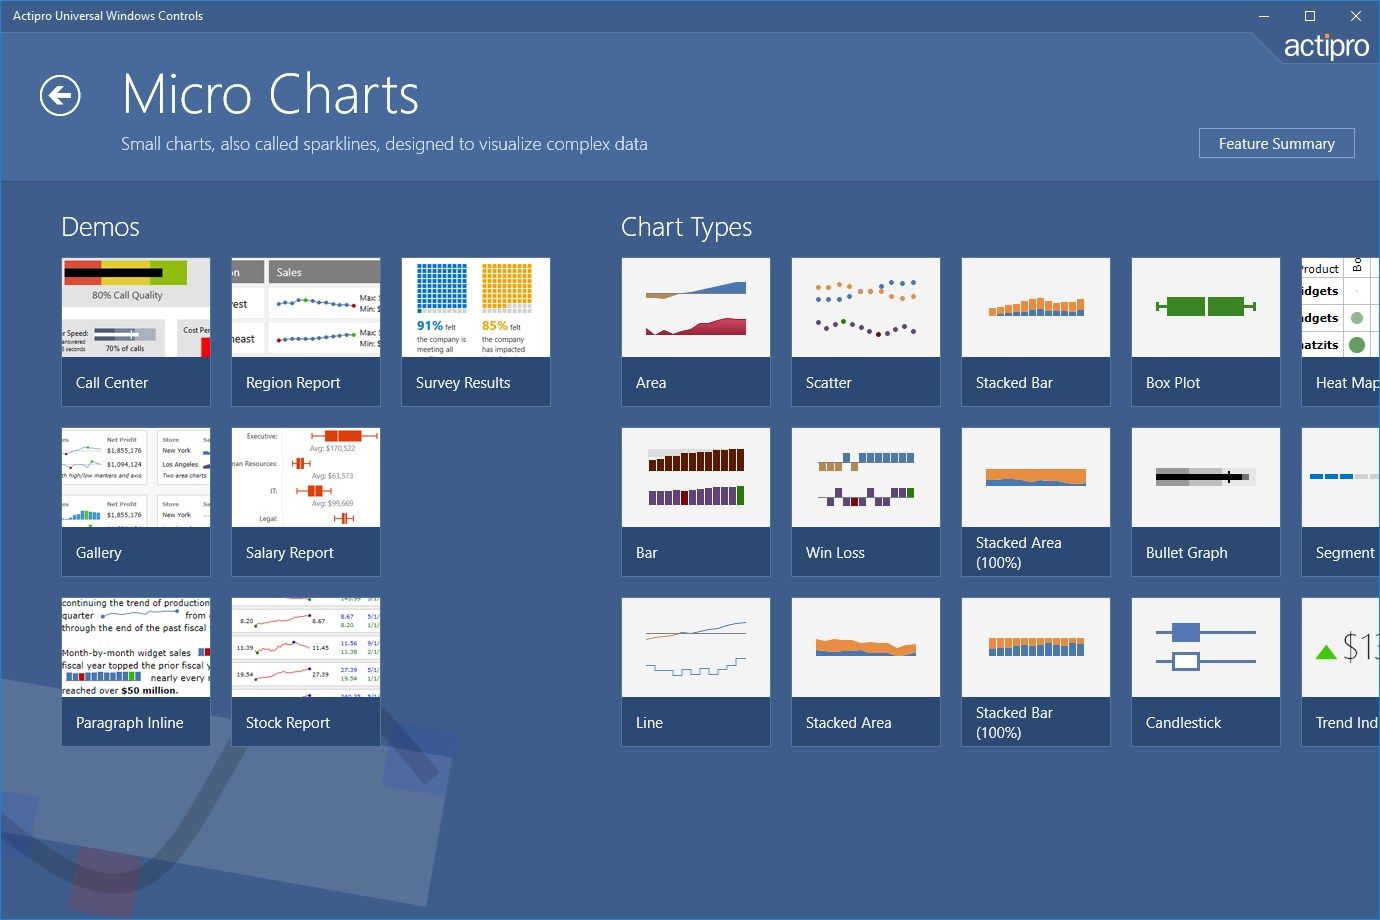 Numerous examples of micro charts.